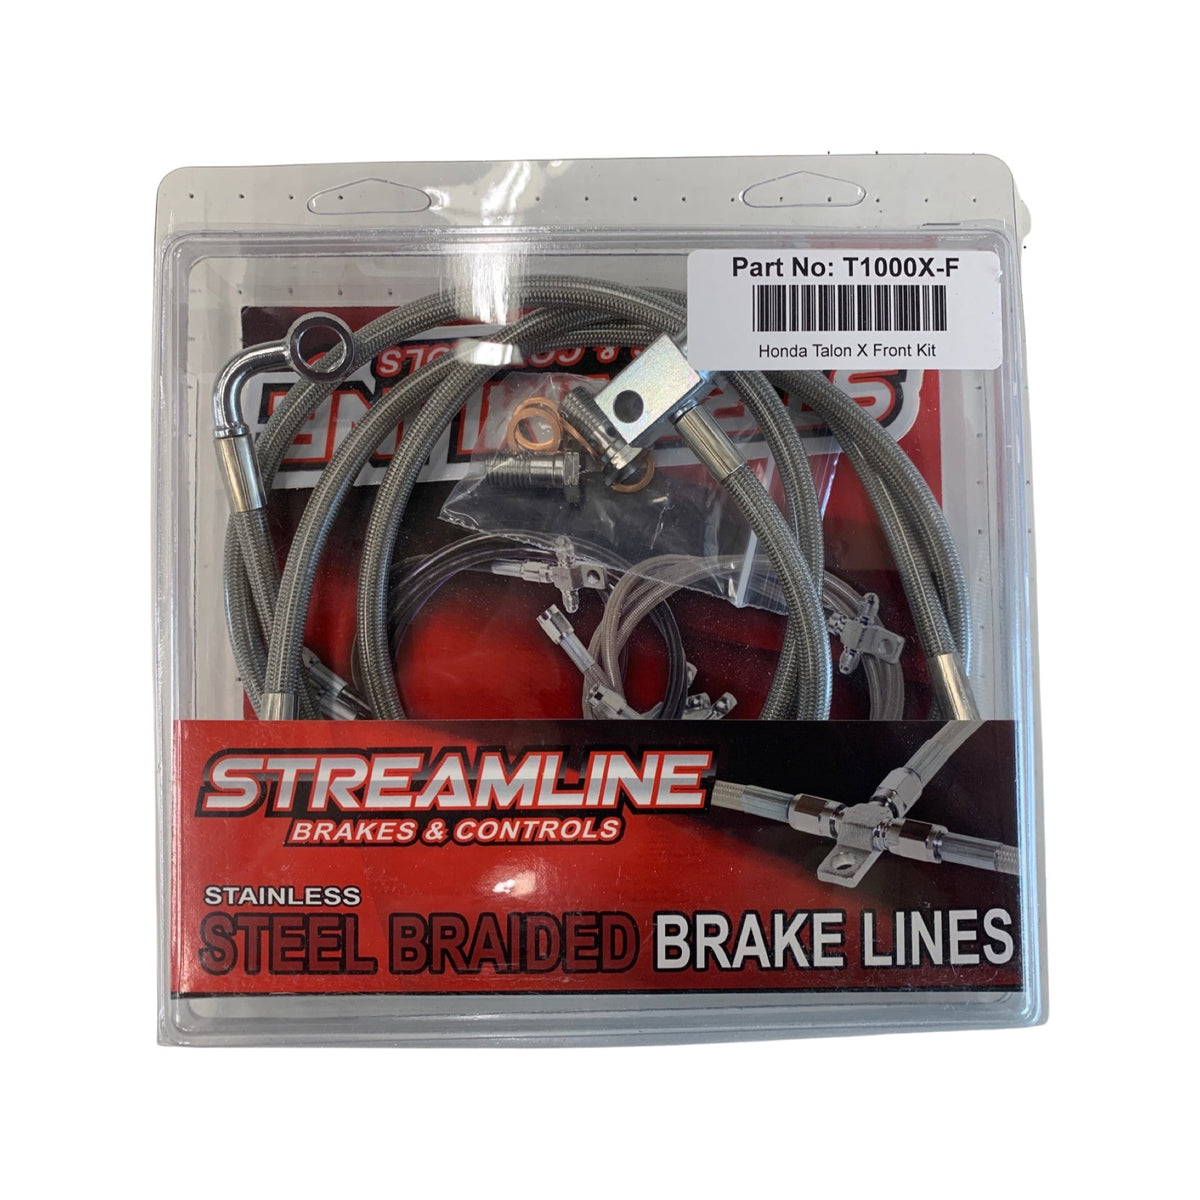 Are Braided Brake Lines Worth It? Everything You Need to Know